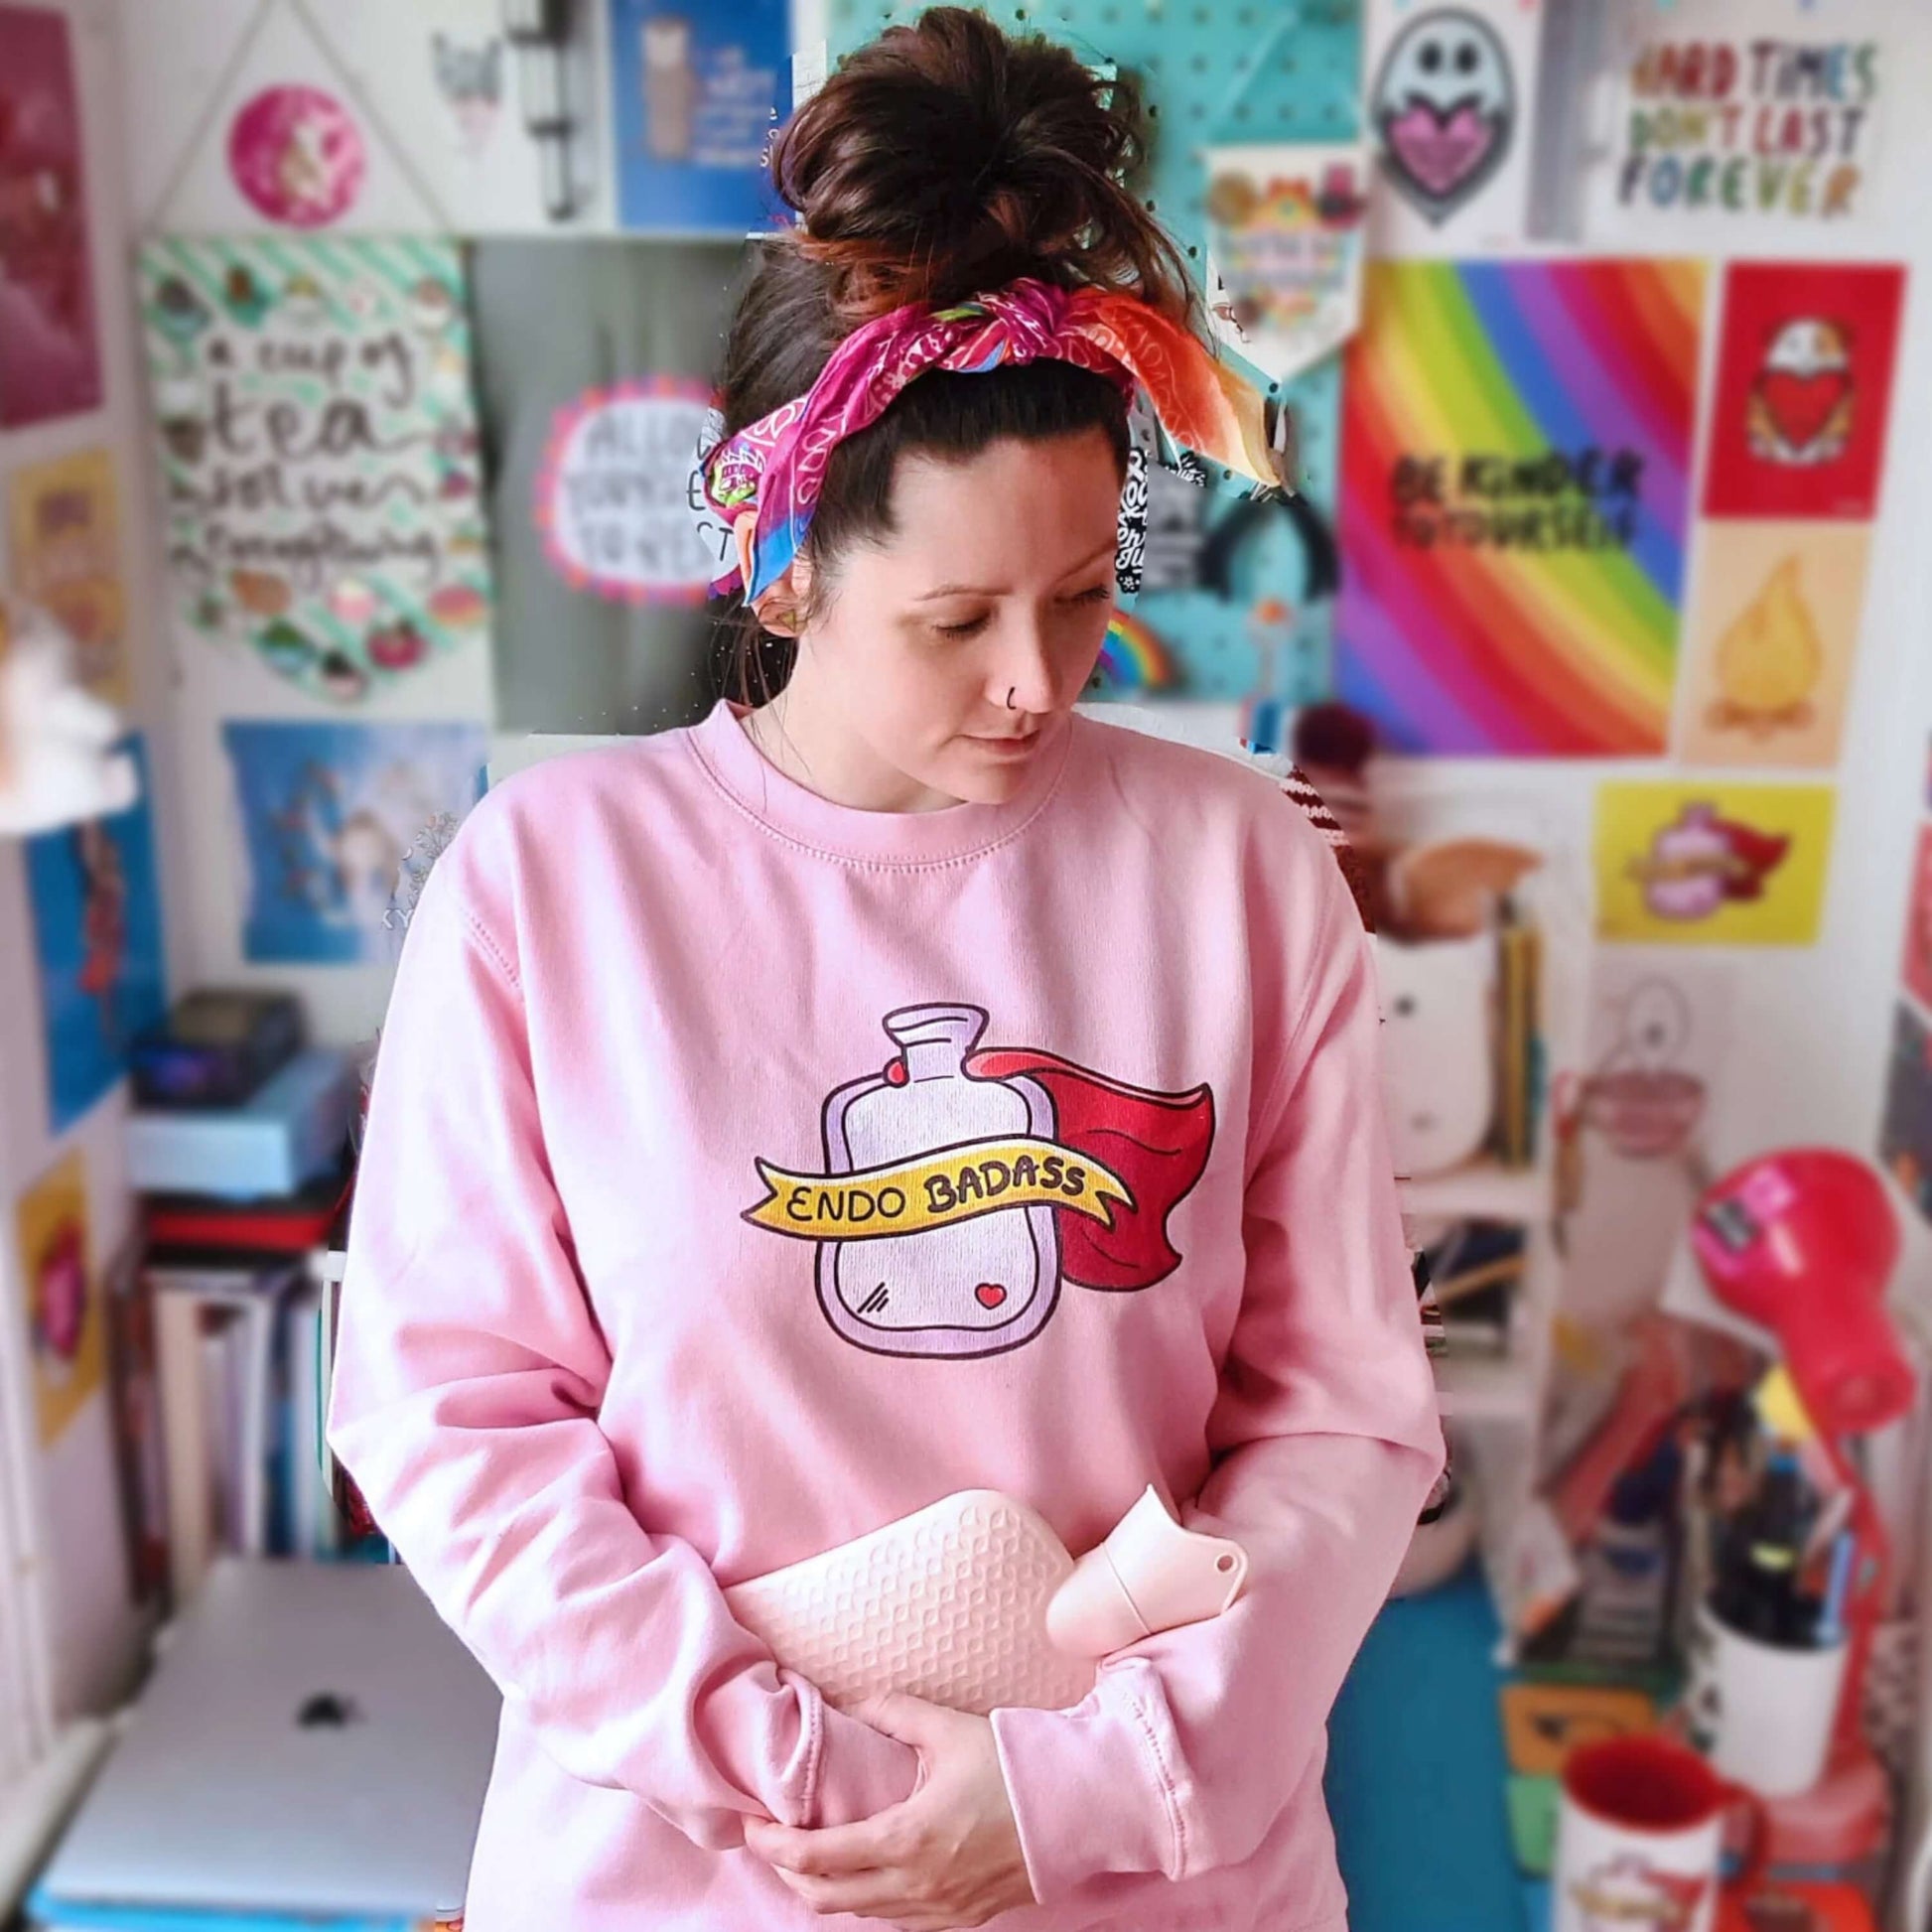 The Endo Badass Sweater - Endometriosis being modelled by Nikky with brown hair in a messy bun looking down to the right clutching a pink hot waterbottle in front of a wall of their artwork. A pastel bubblegum baby pink sweatshirt jumper with a pink hot waterbottle with a small red heart, red cape and yellow banner reading 'endo badass' in black text. The hand drawn design is raising awareness for endometriosis and pelvic pain.